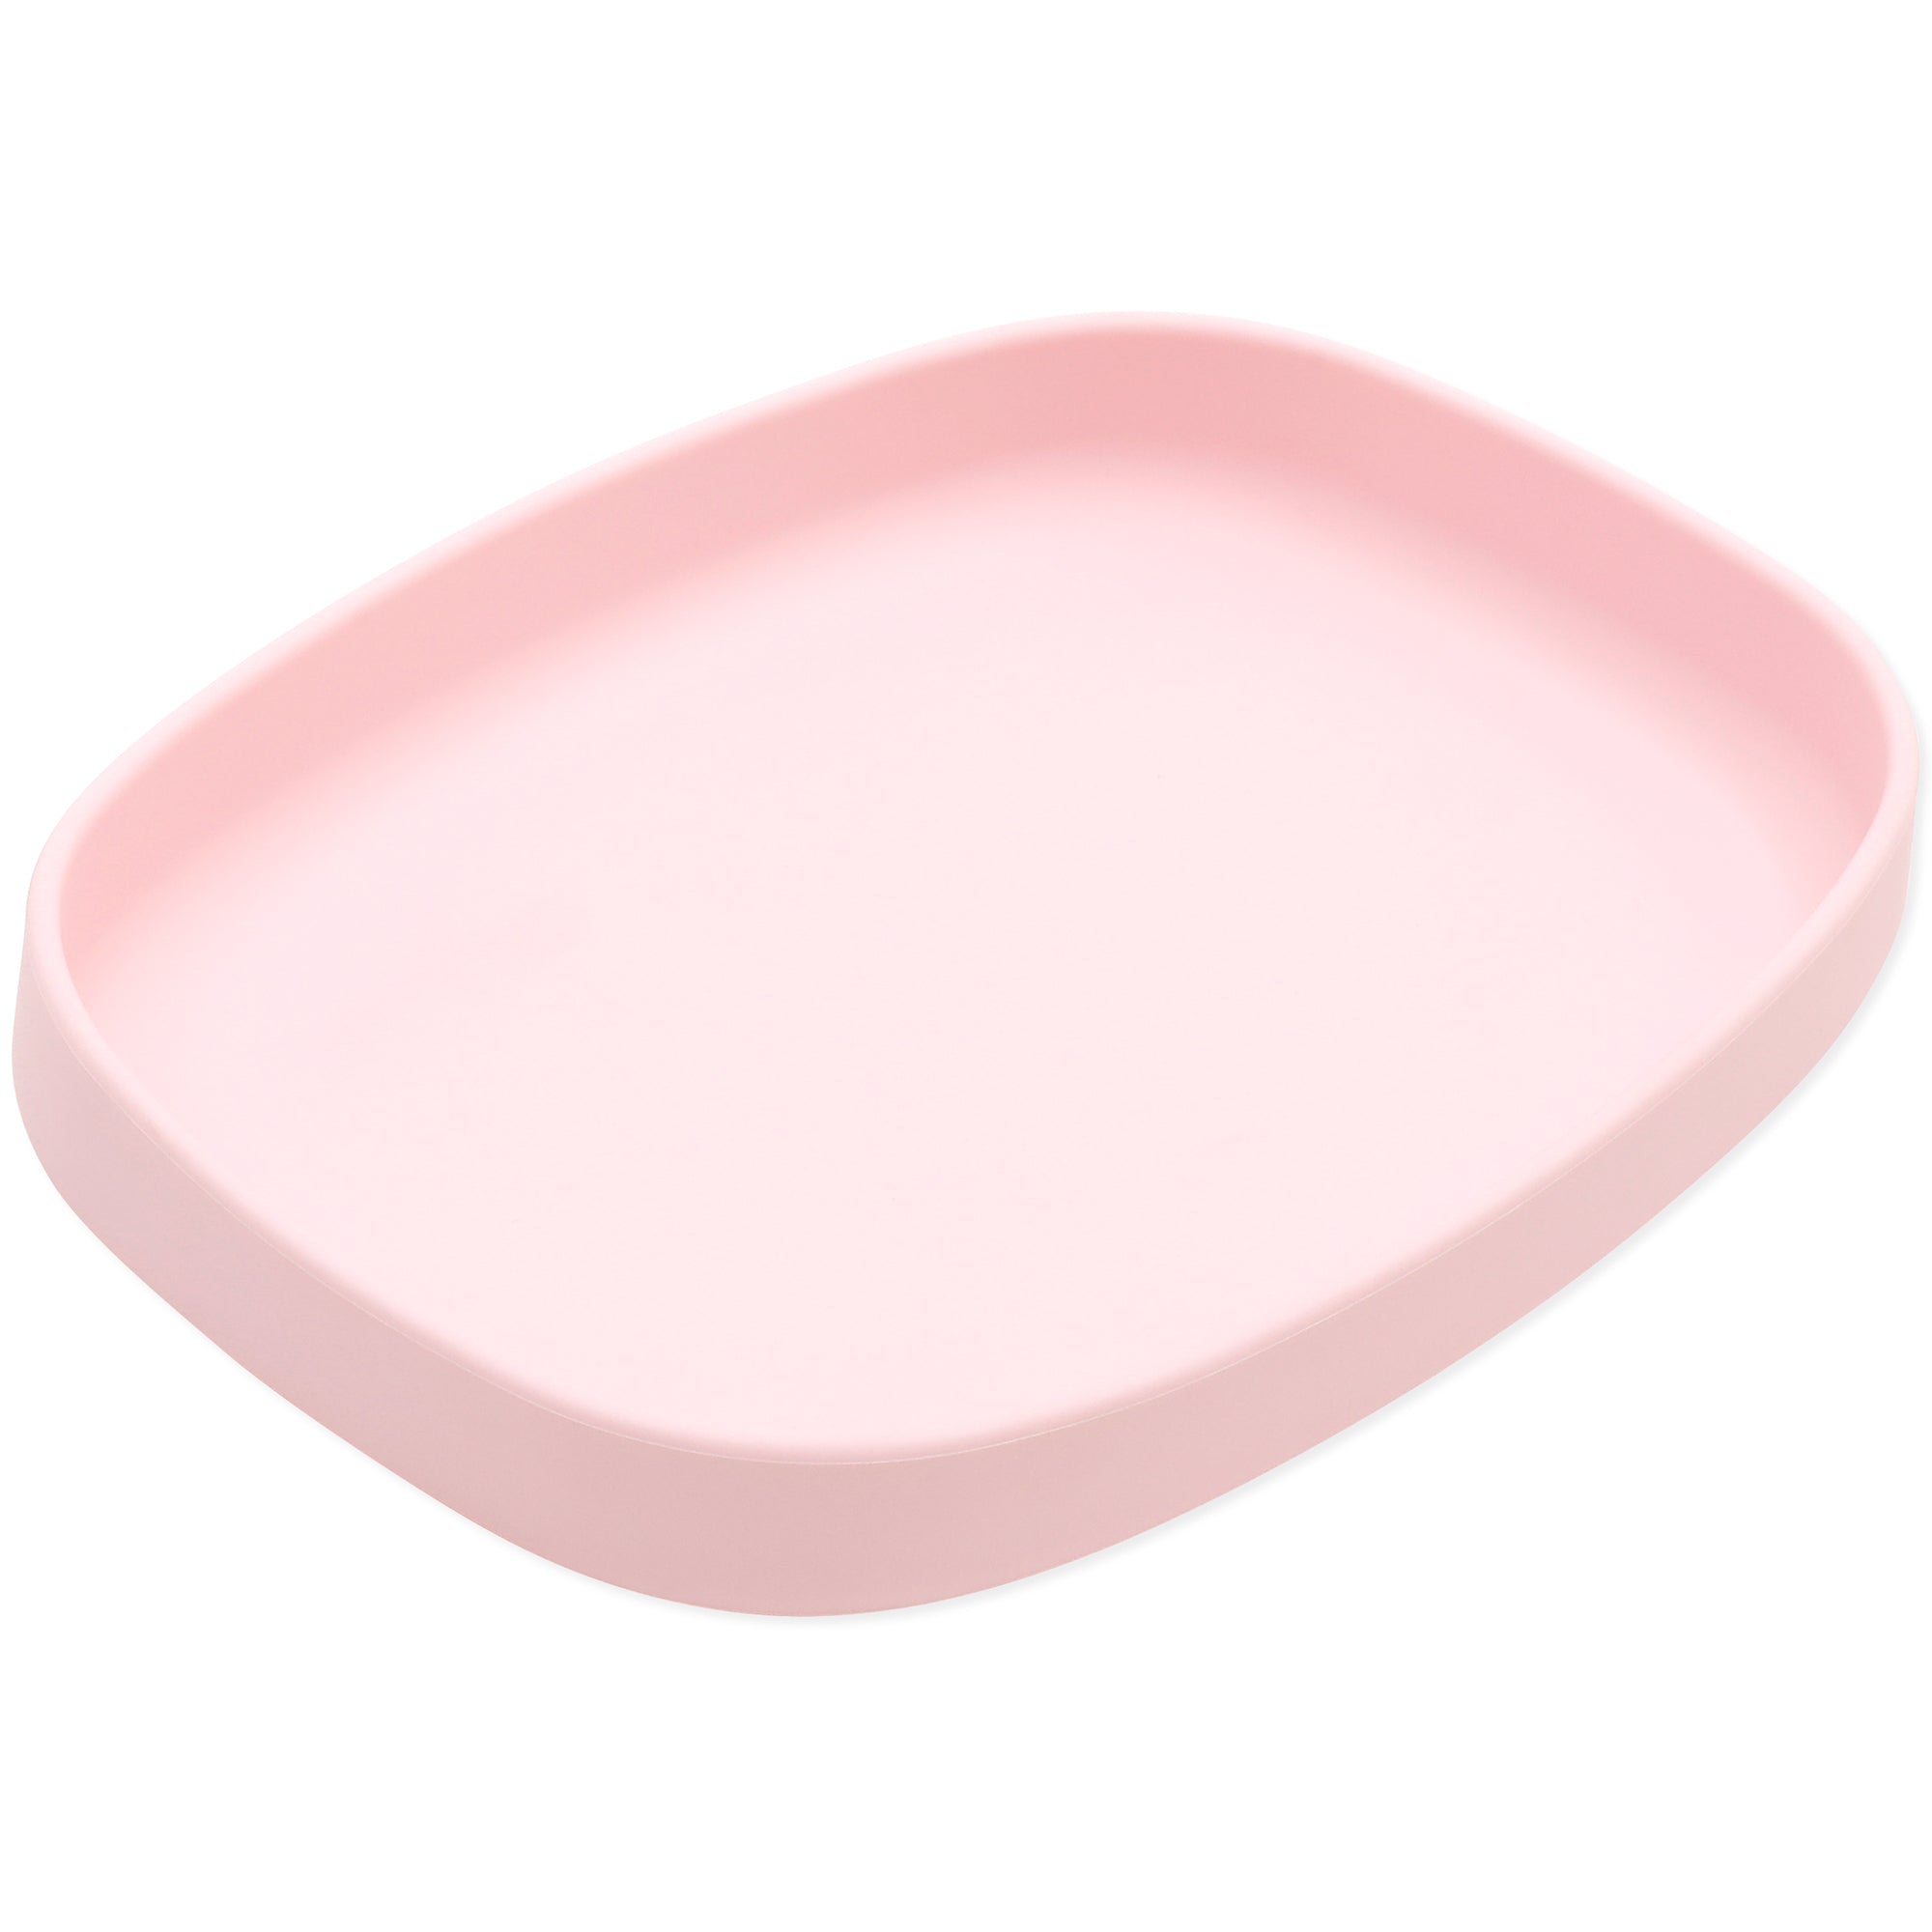 Silicone Grip Tray: Pink